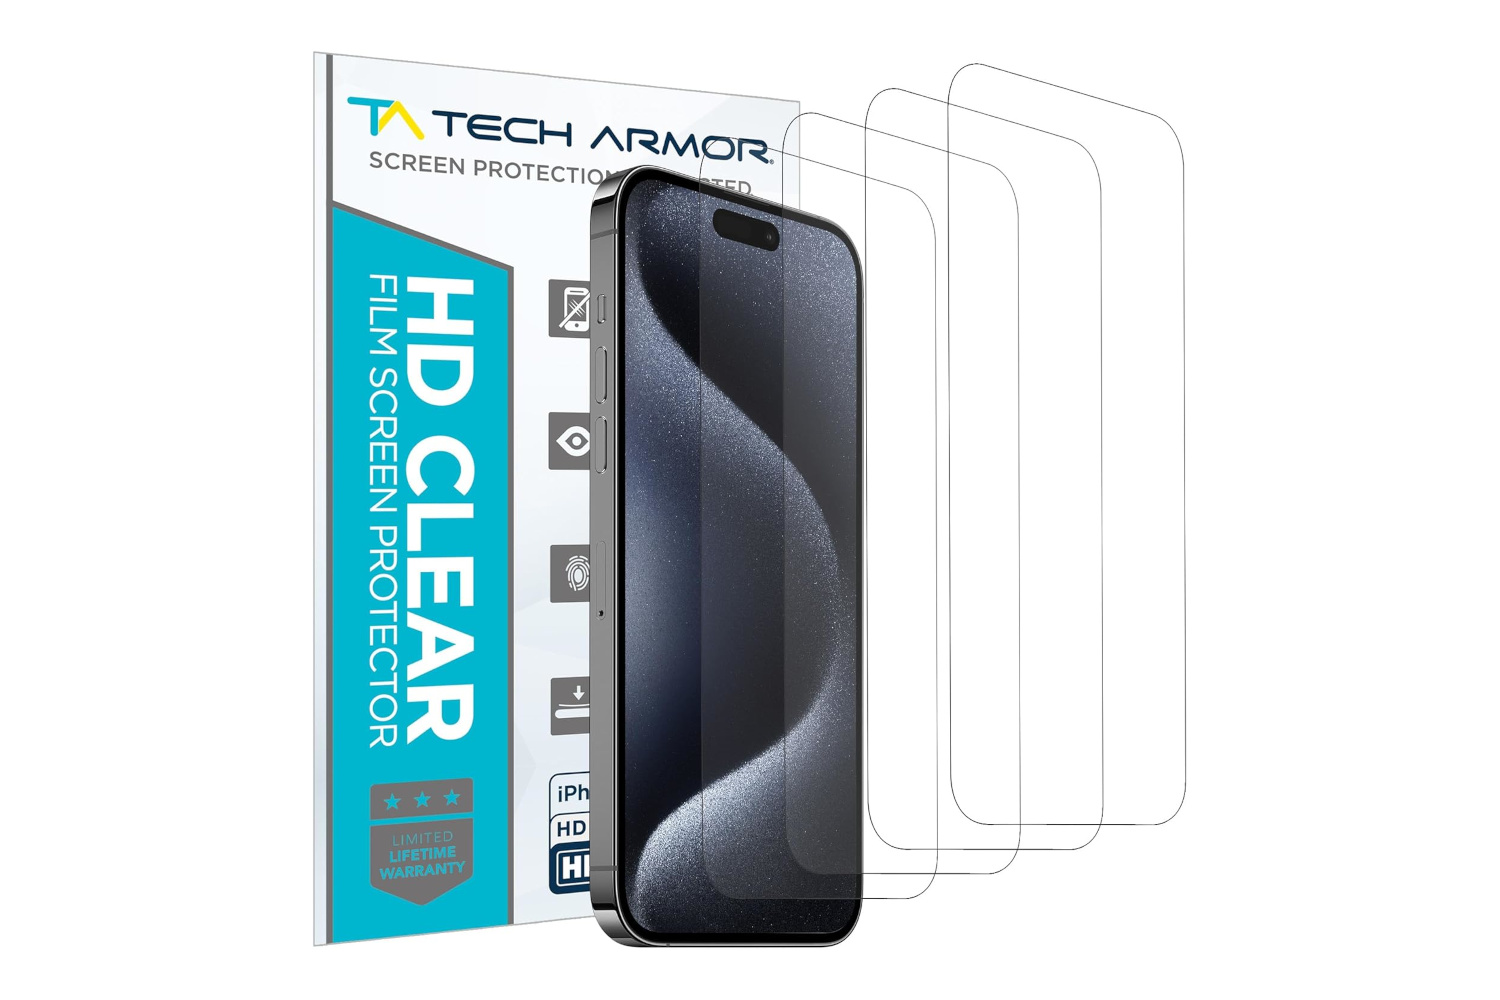 The Tech Armor screen protector on a blank background.